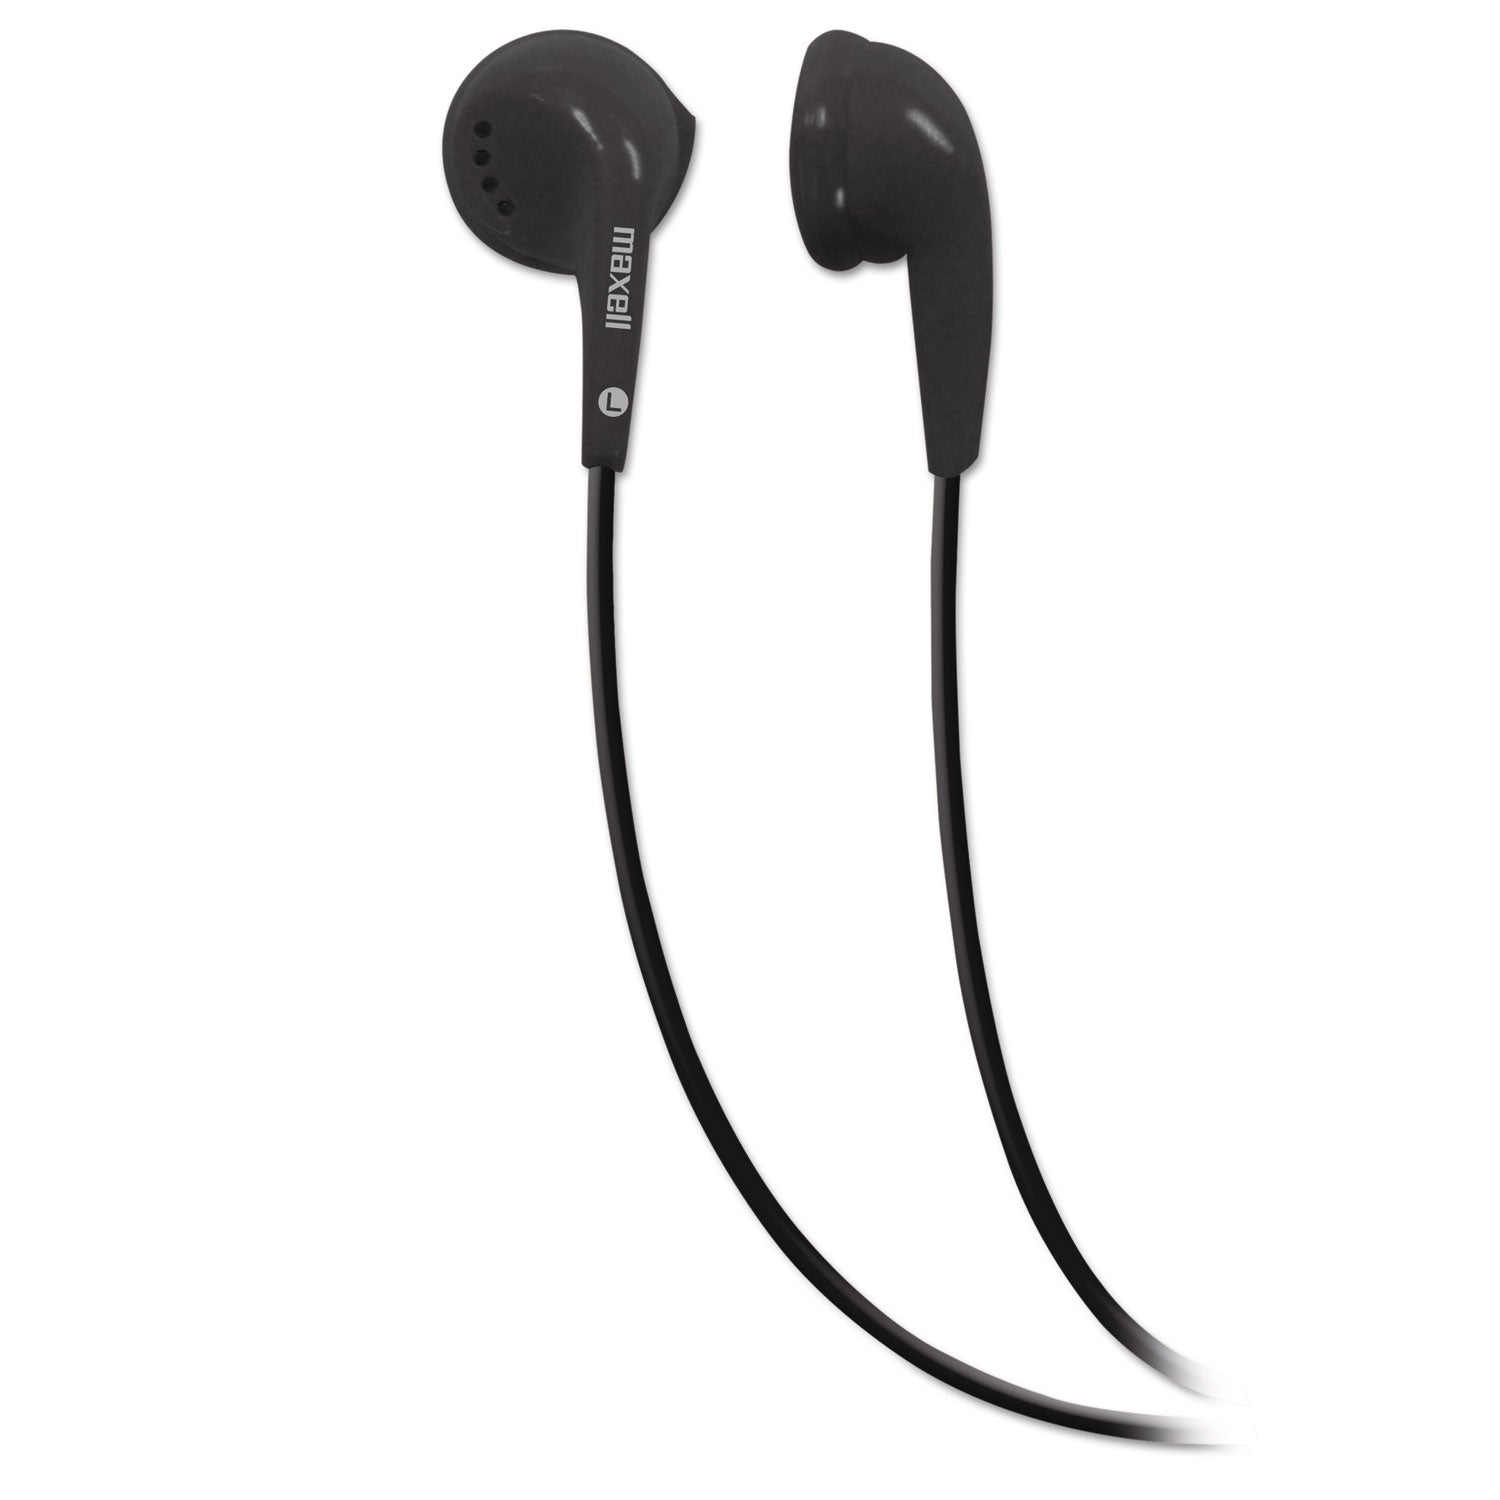 EB-95 Stereo Earbuds, 3 ft Cord, Black - 